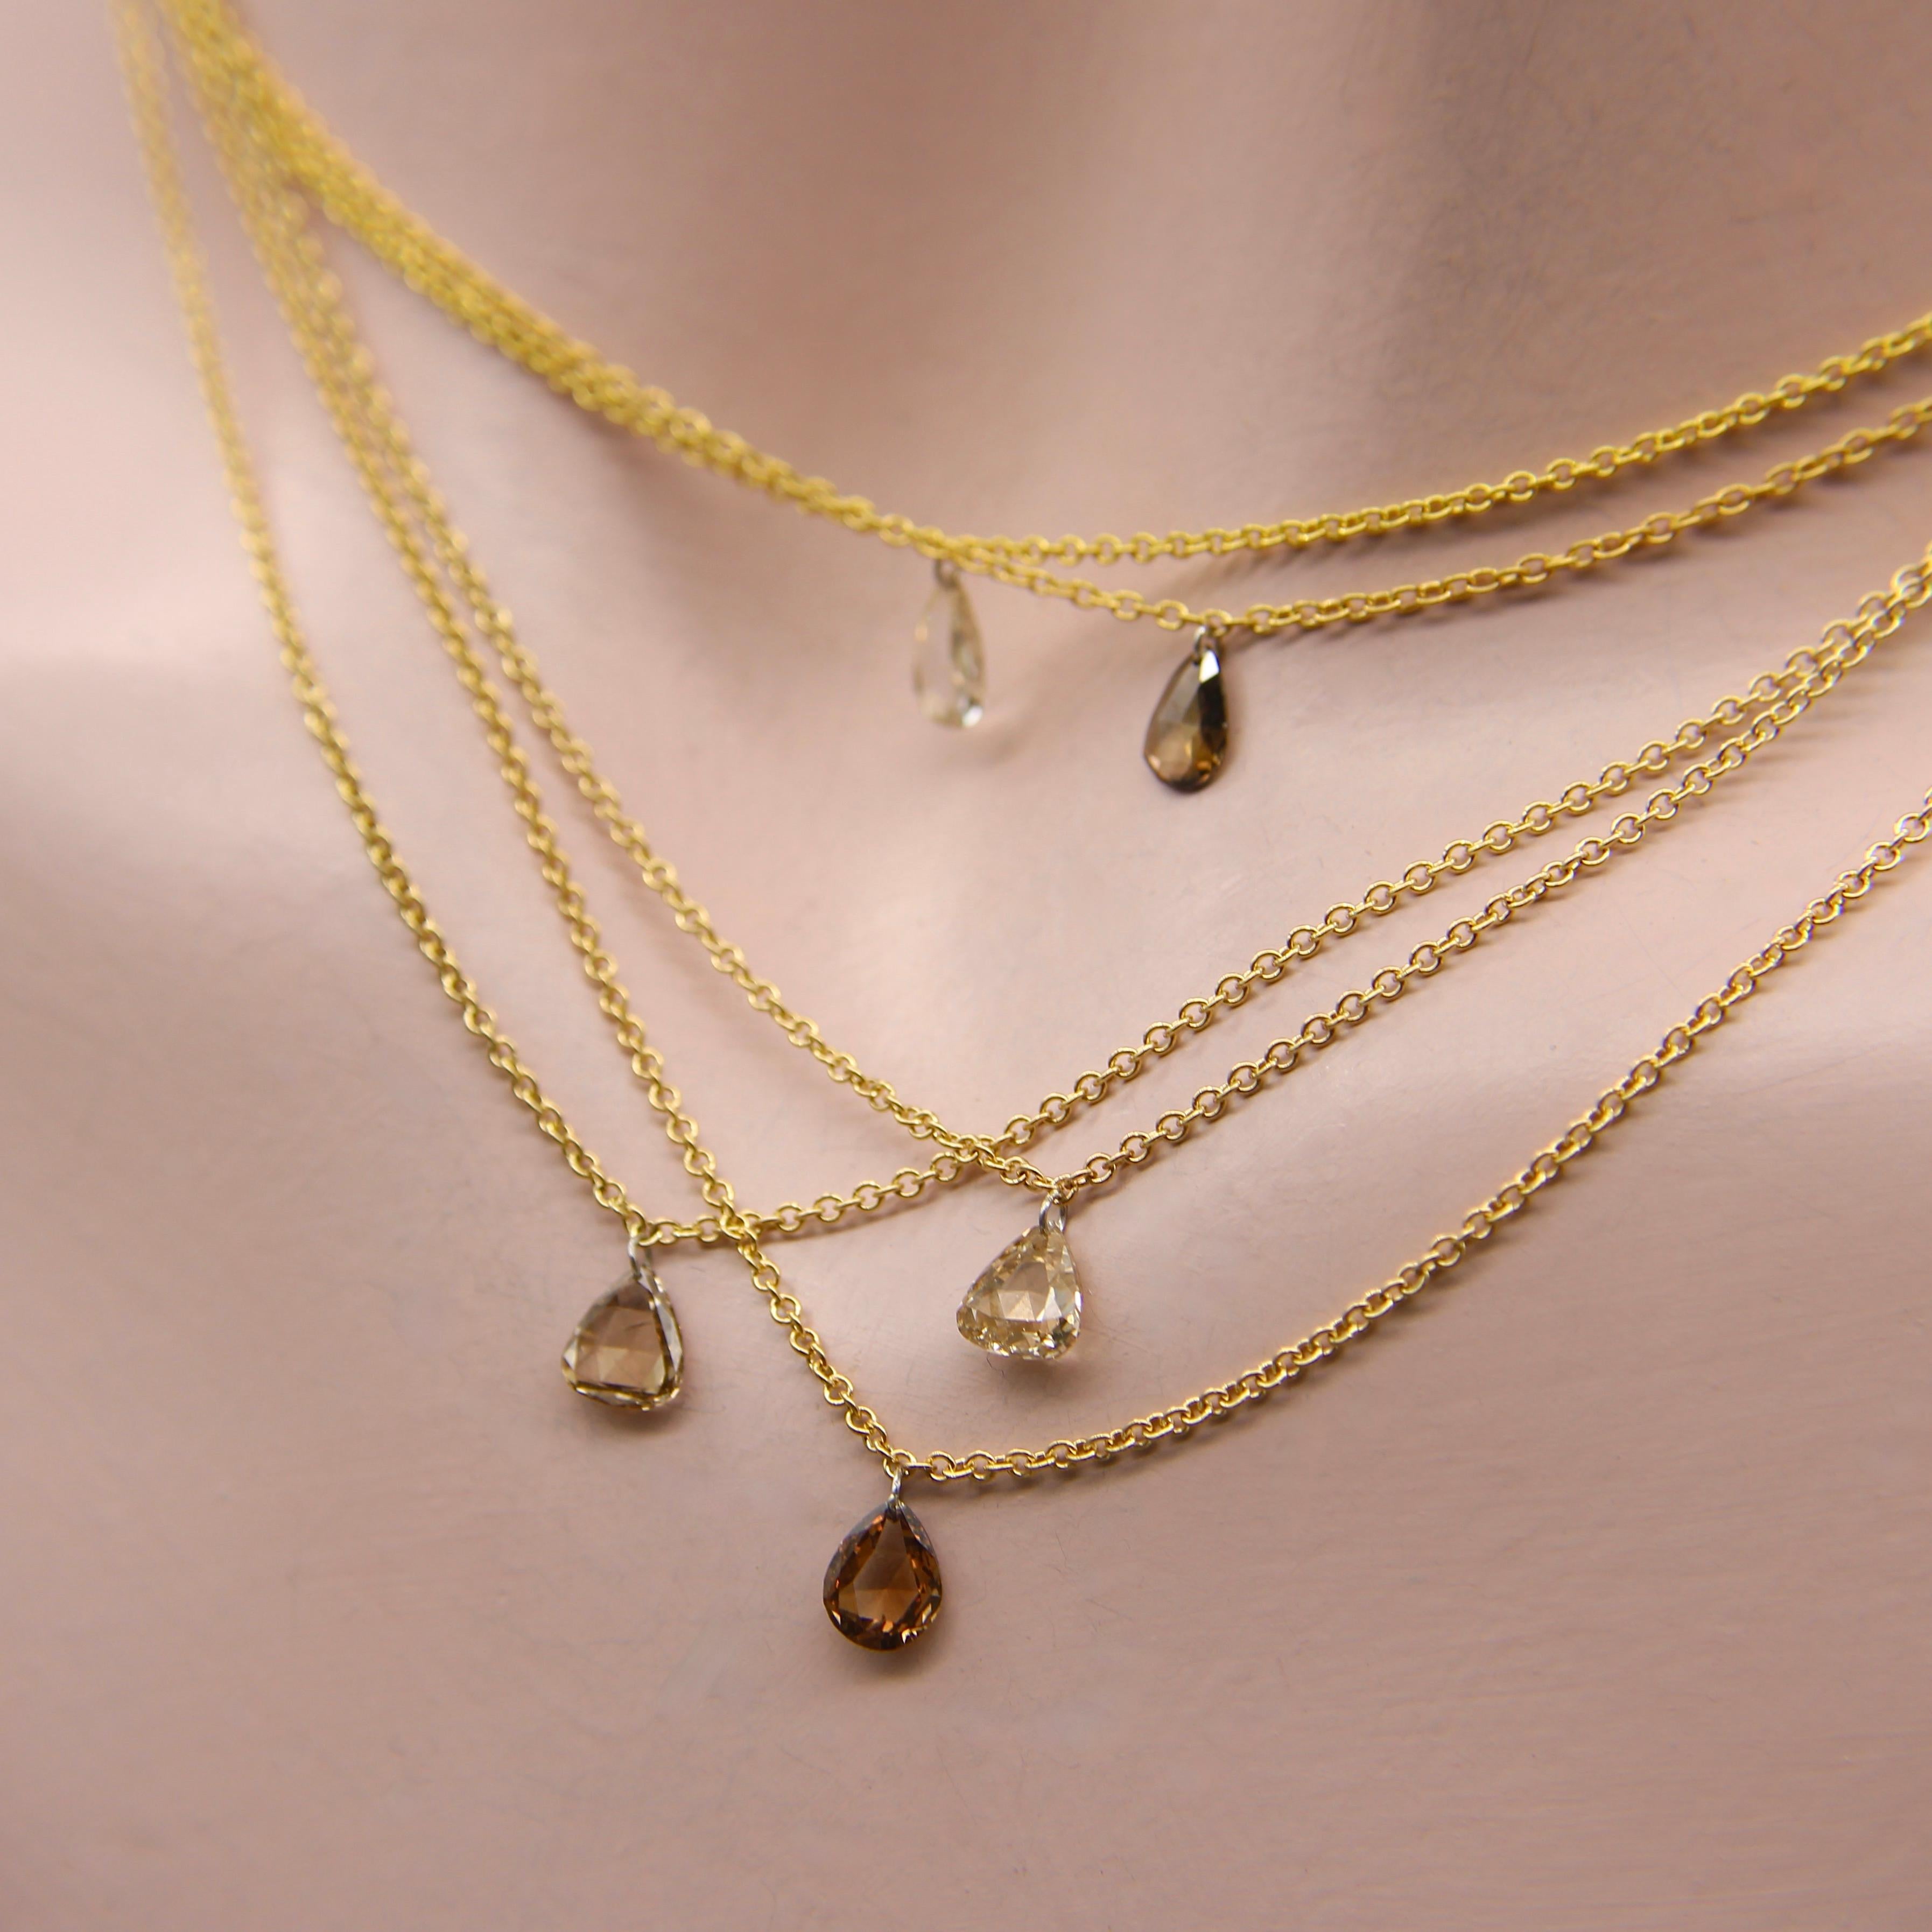 Dangling Pear Shaped Cognac Rose Cut Diamond on 14K Gold Chain  For Sale 2